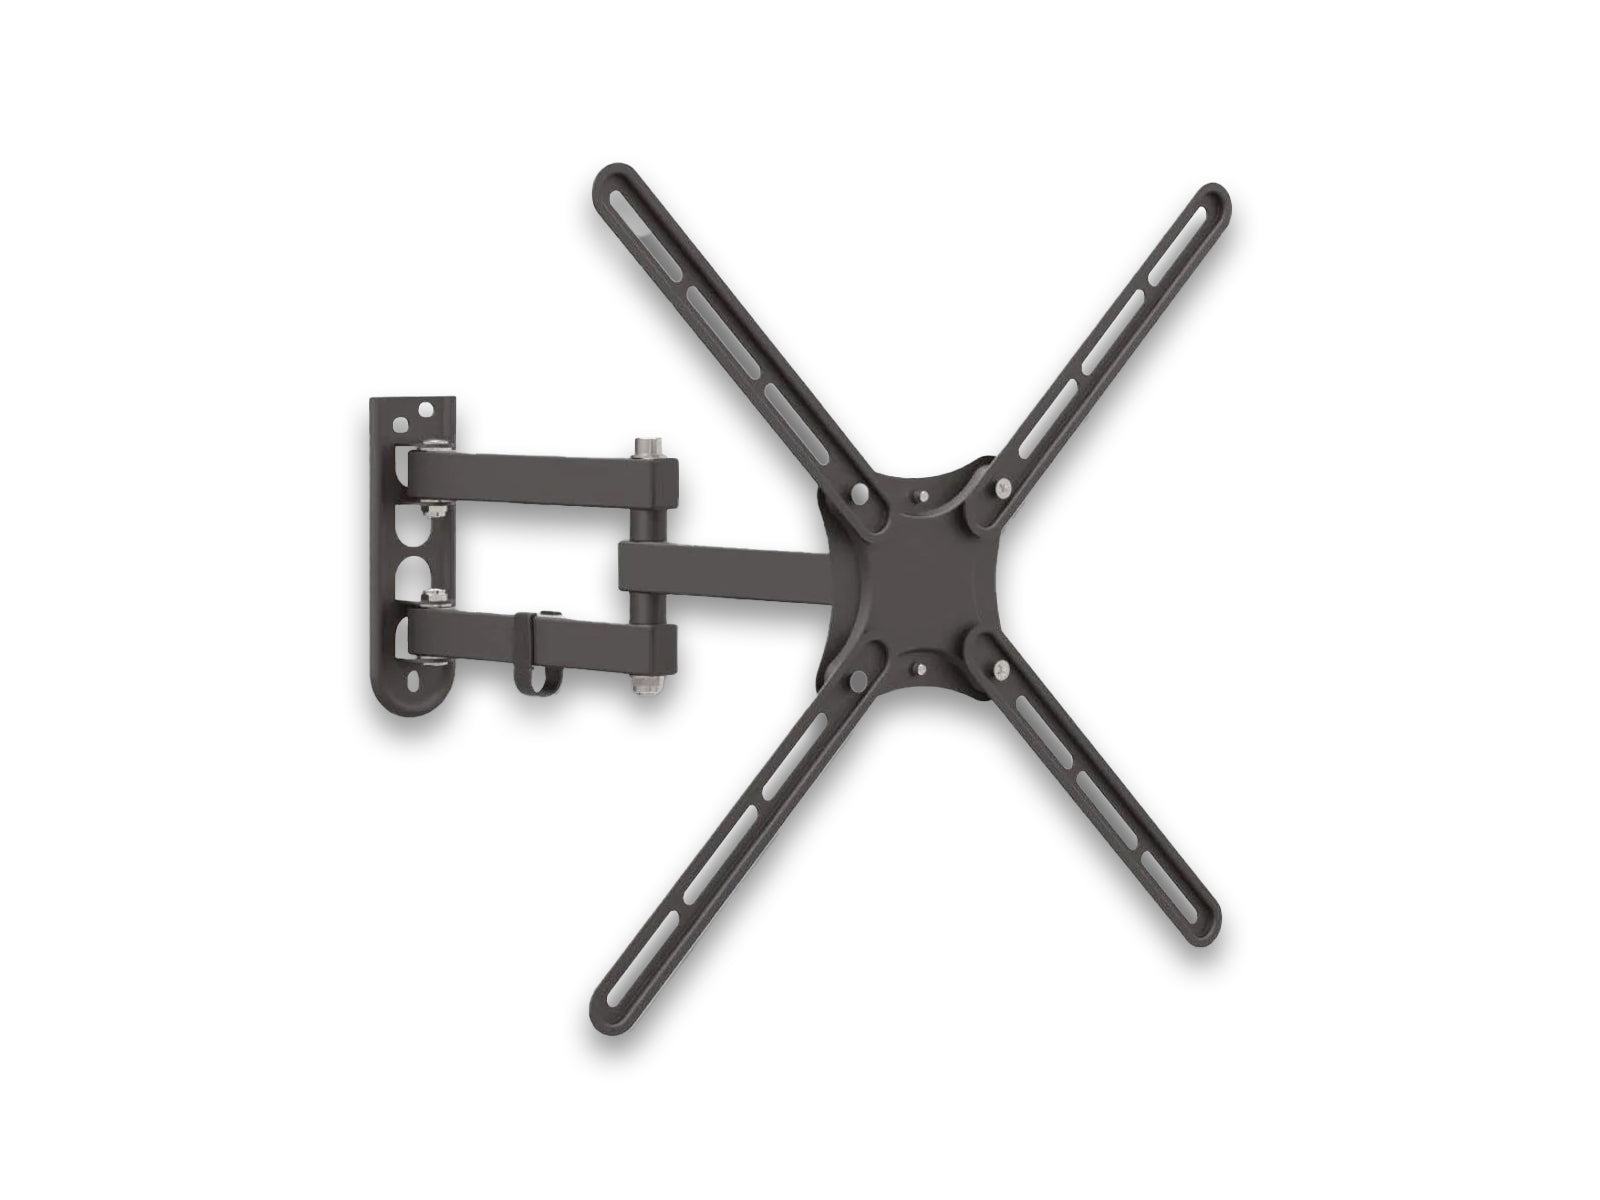 Dual-arm-tv-wall-bracket-on-the-white-background